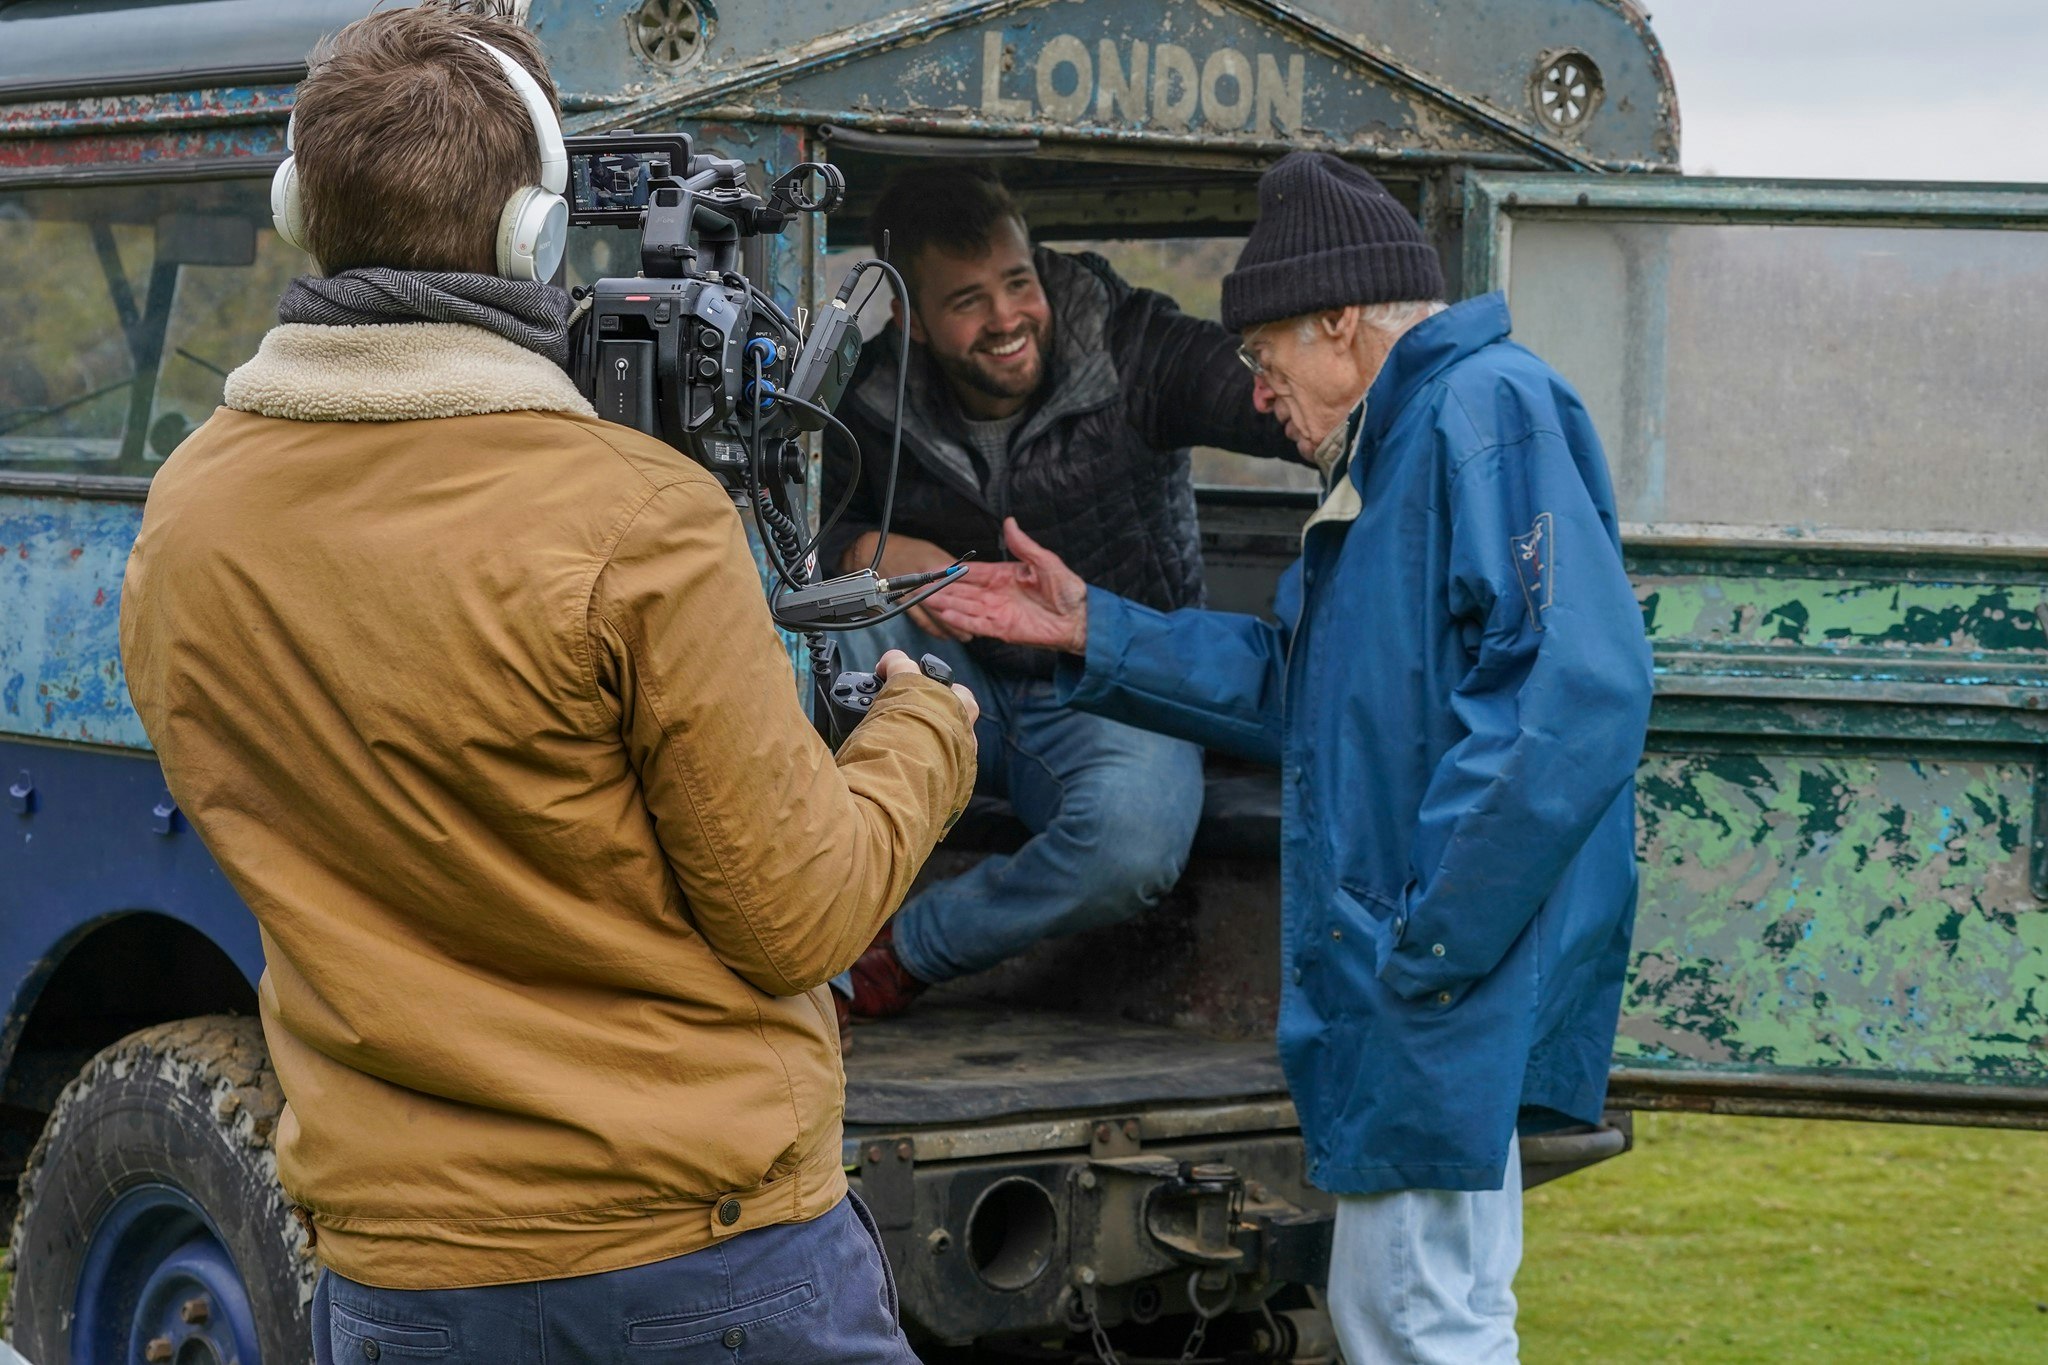 Tim Slessor (87) and two cameramen stand by a Land Rover vehicle